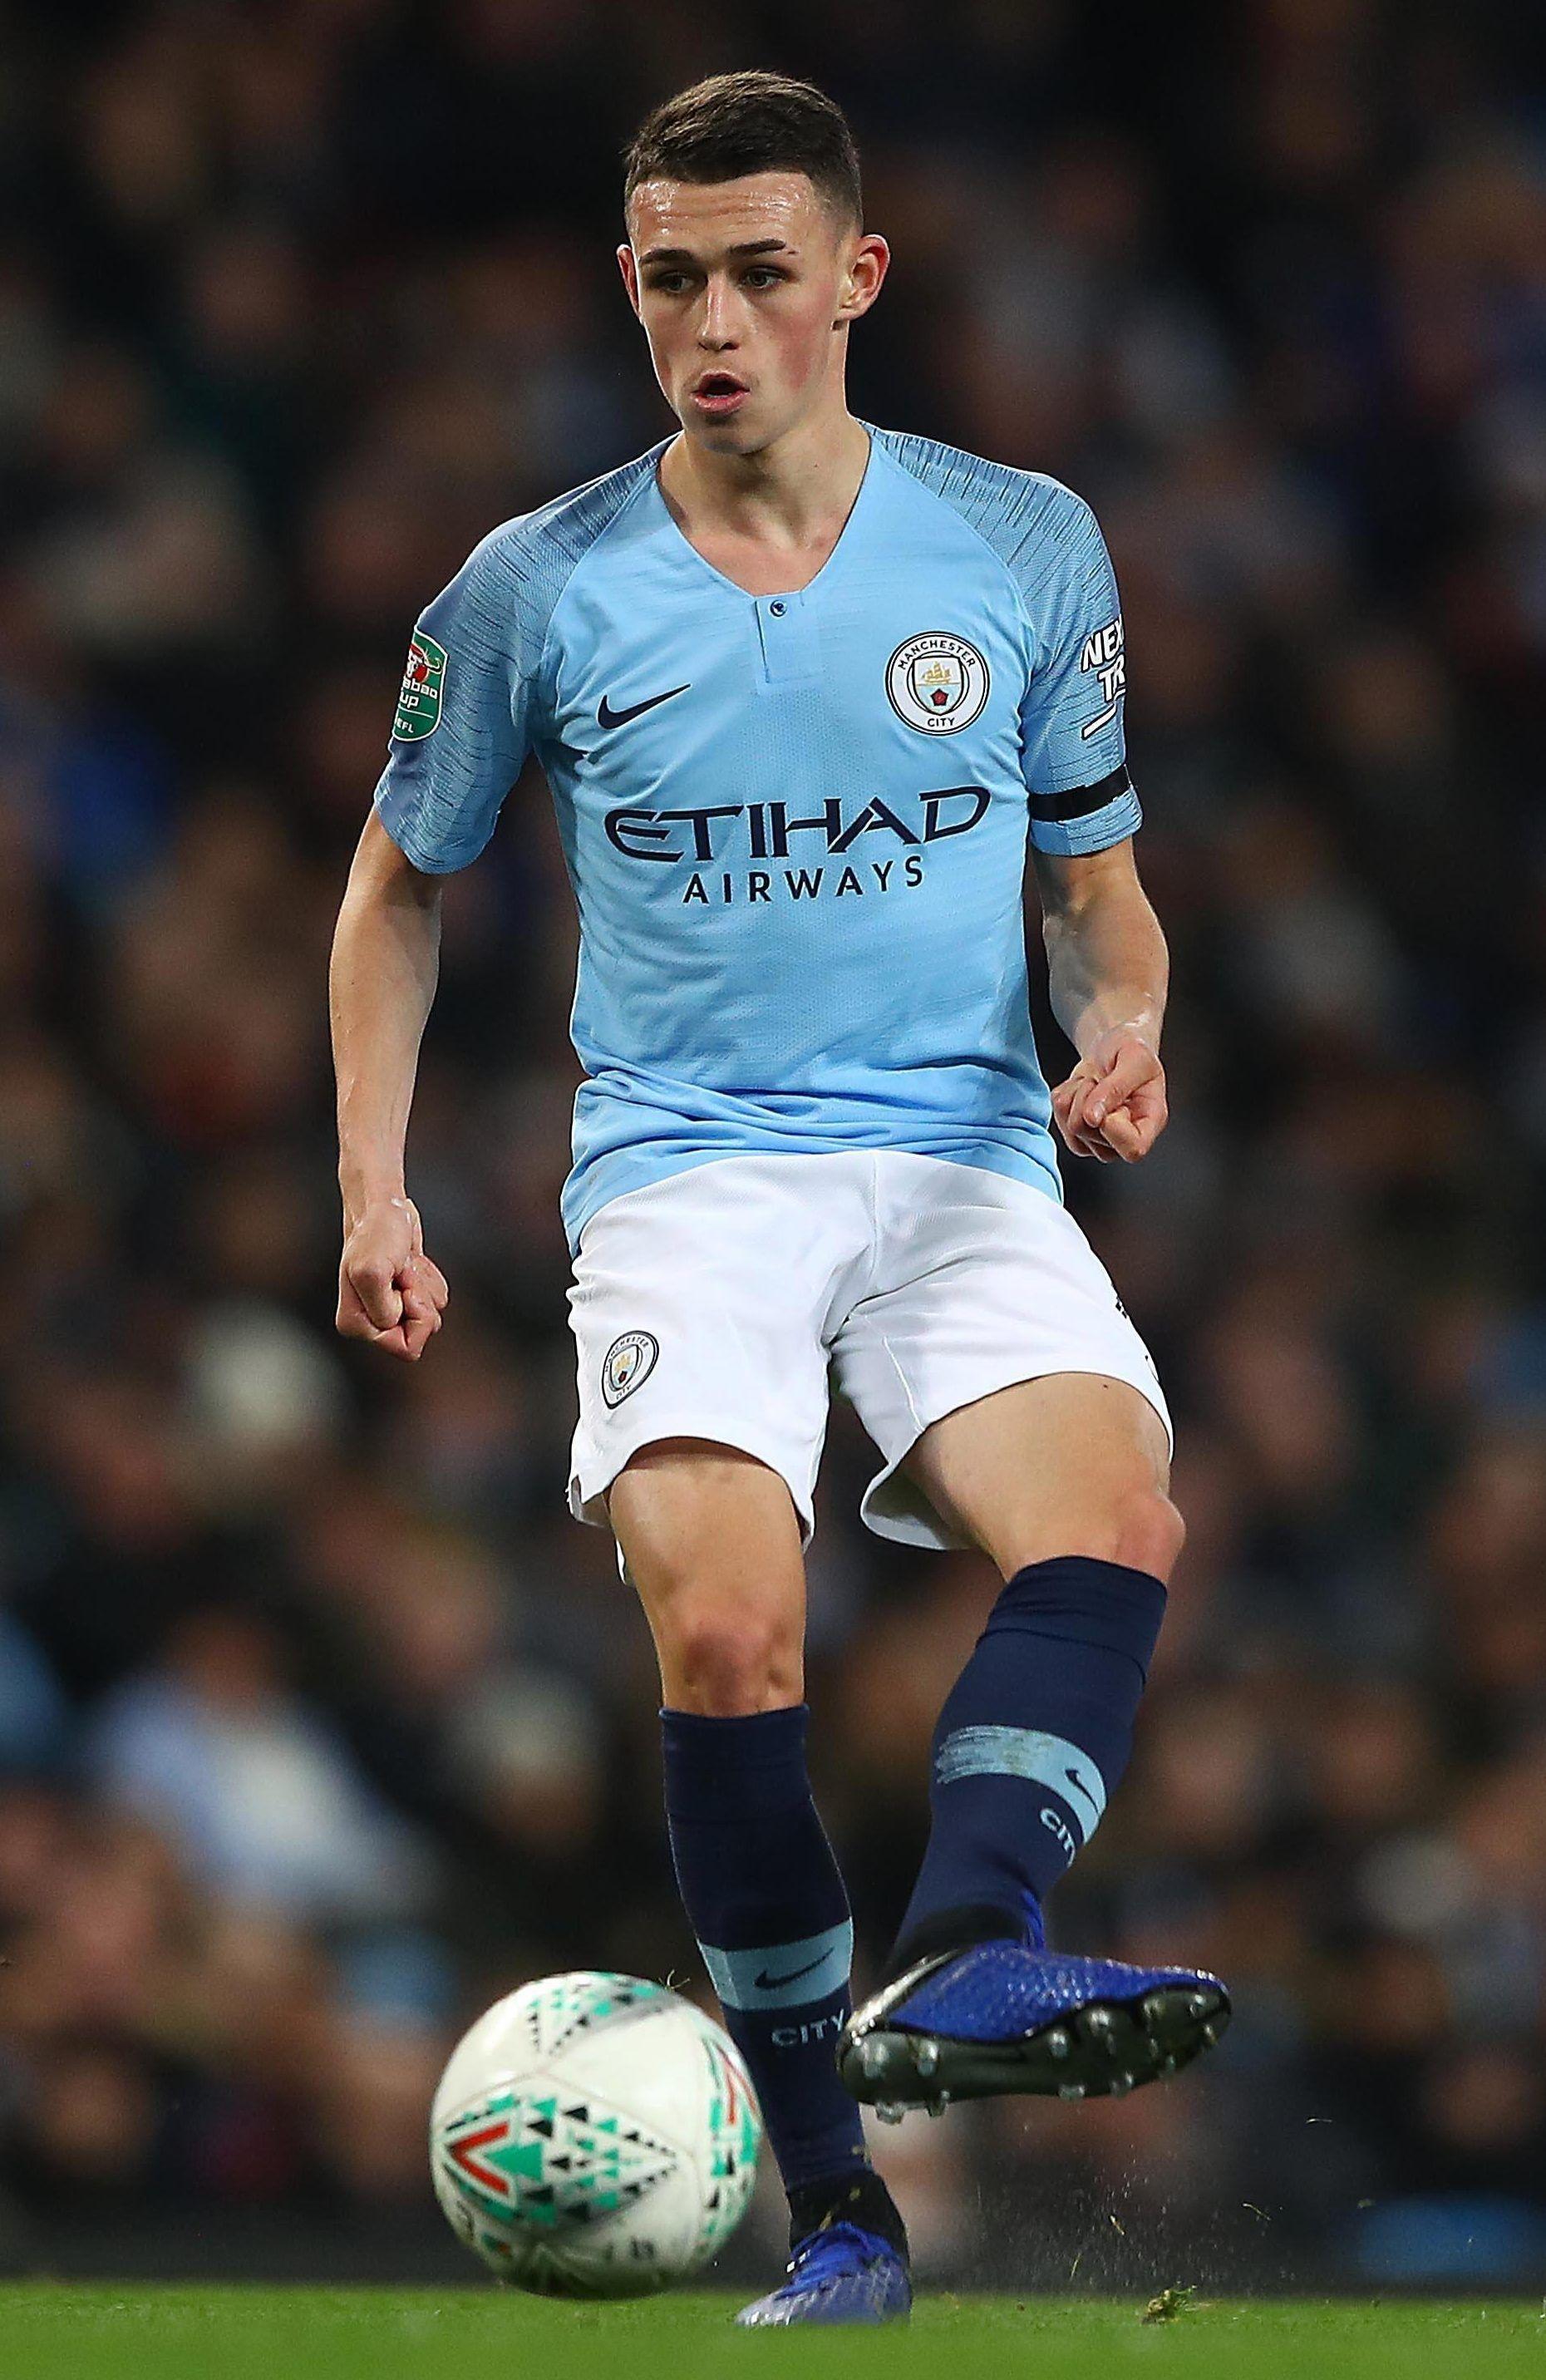 Phil Foden 2021 Wallpapers - Wallpaper Cave